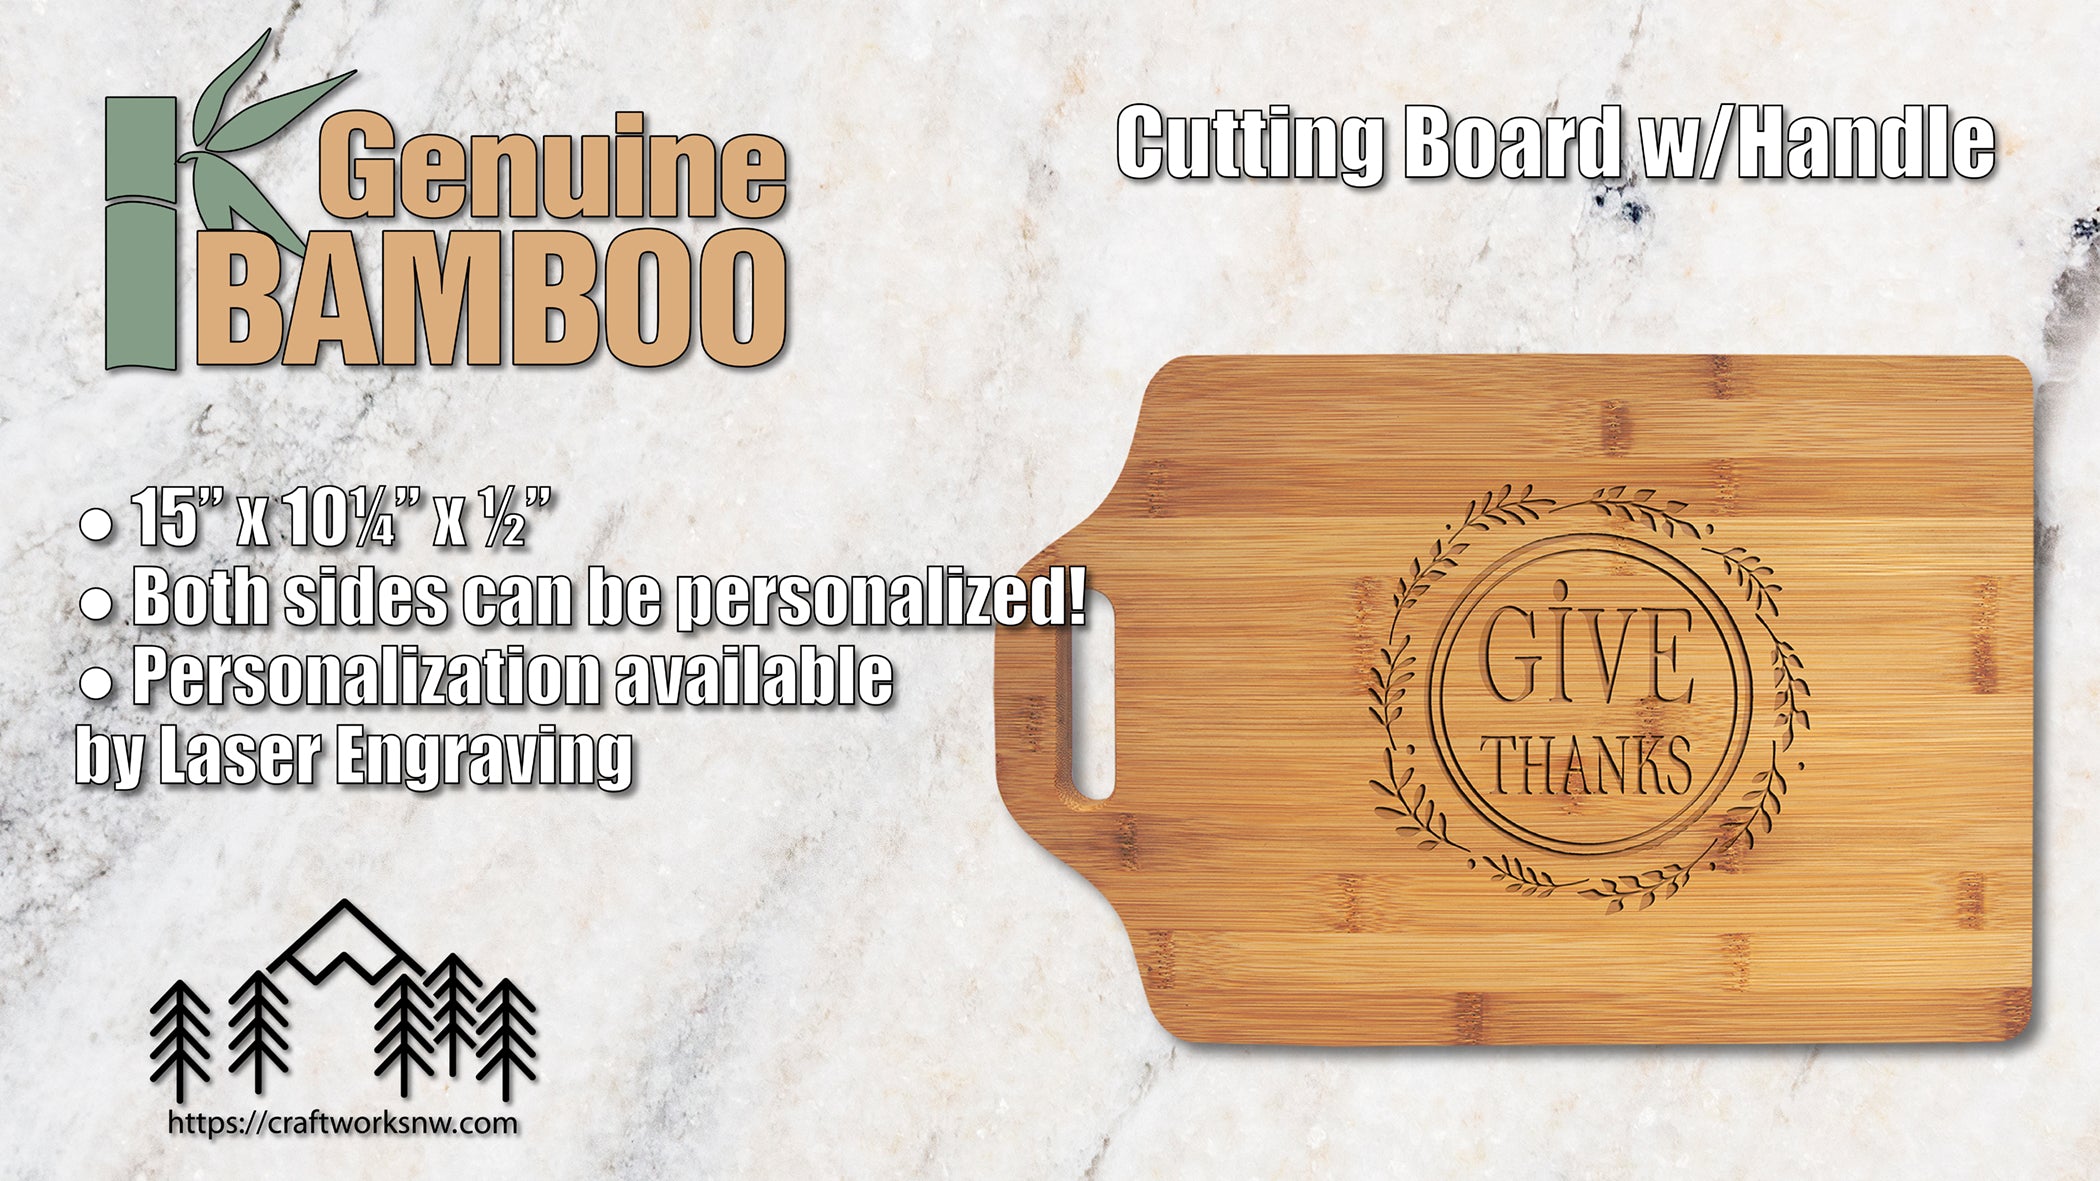 Cutting Board with Handle, Bamboo, 15" x 10-1/4", Laser Engraved - Craftworks NW, LLC